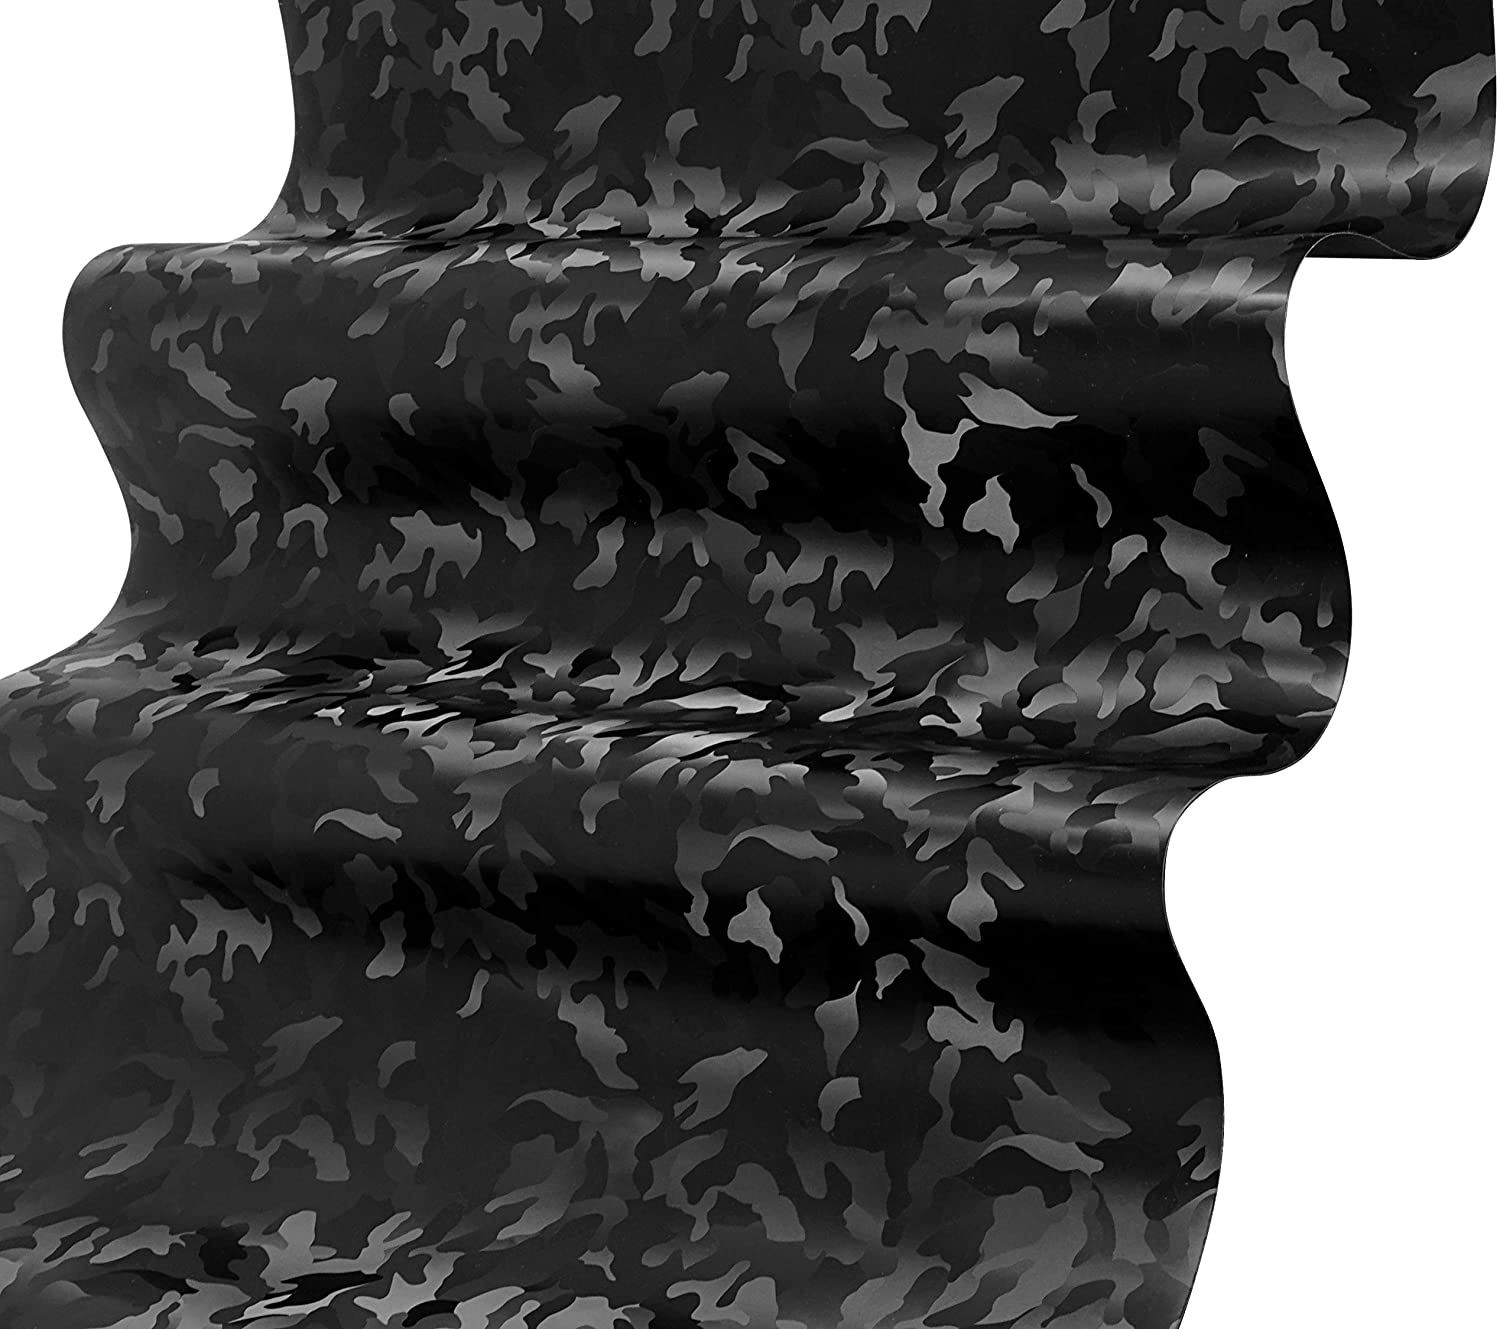 VVIVID+ Black Stealth Camouflage Micro Pattern